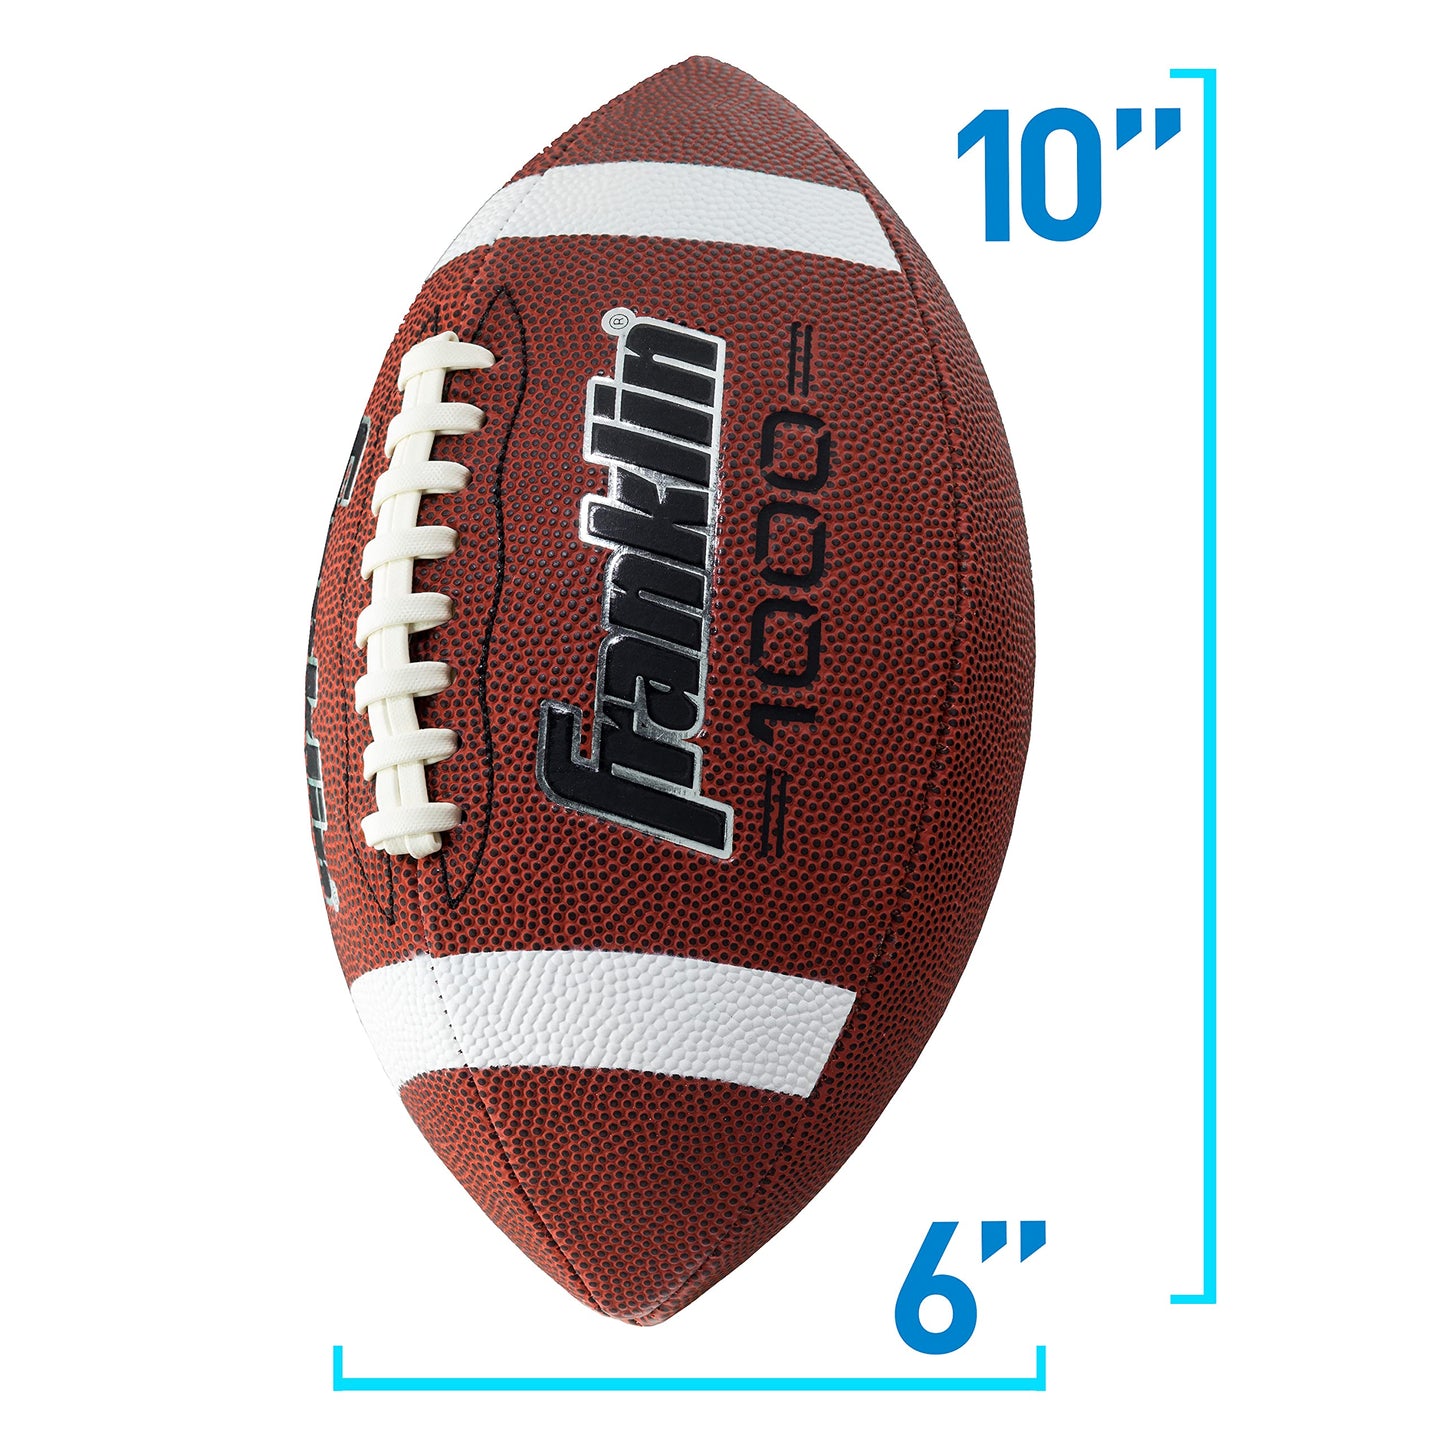 Franklin Sports Grip-Rite Junior Football — Fun Youth-Size Synthetic Leather Football for Kids’ Games